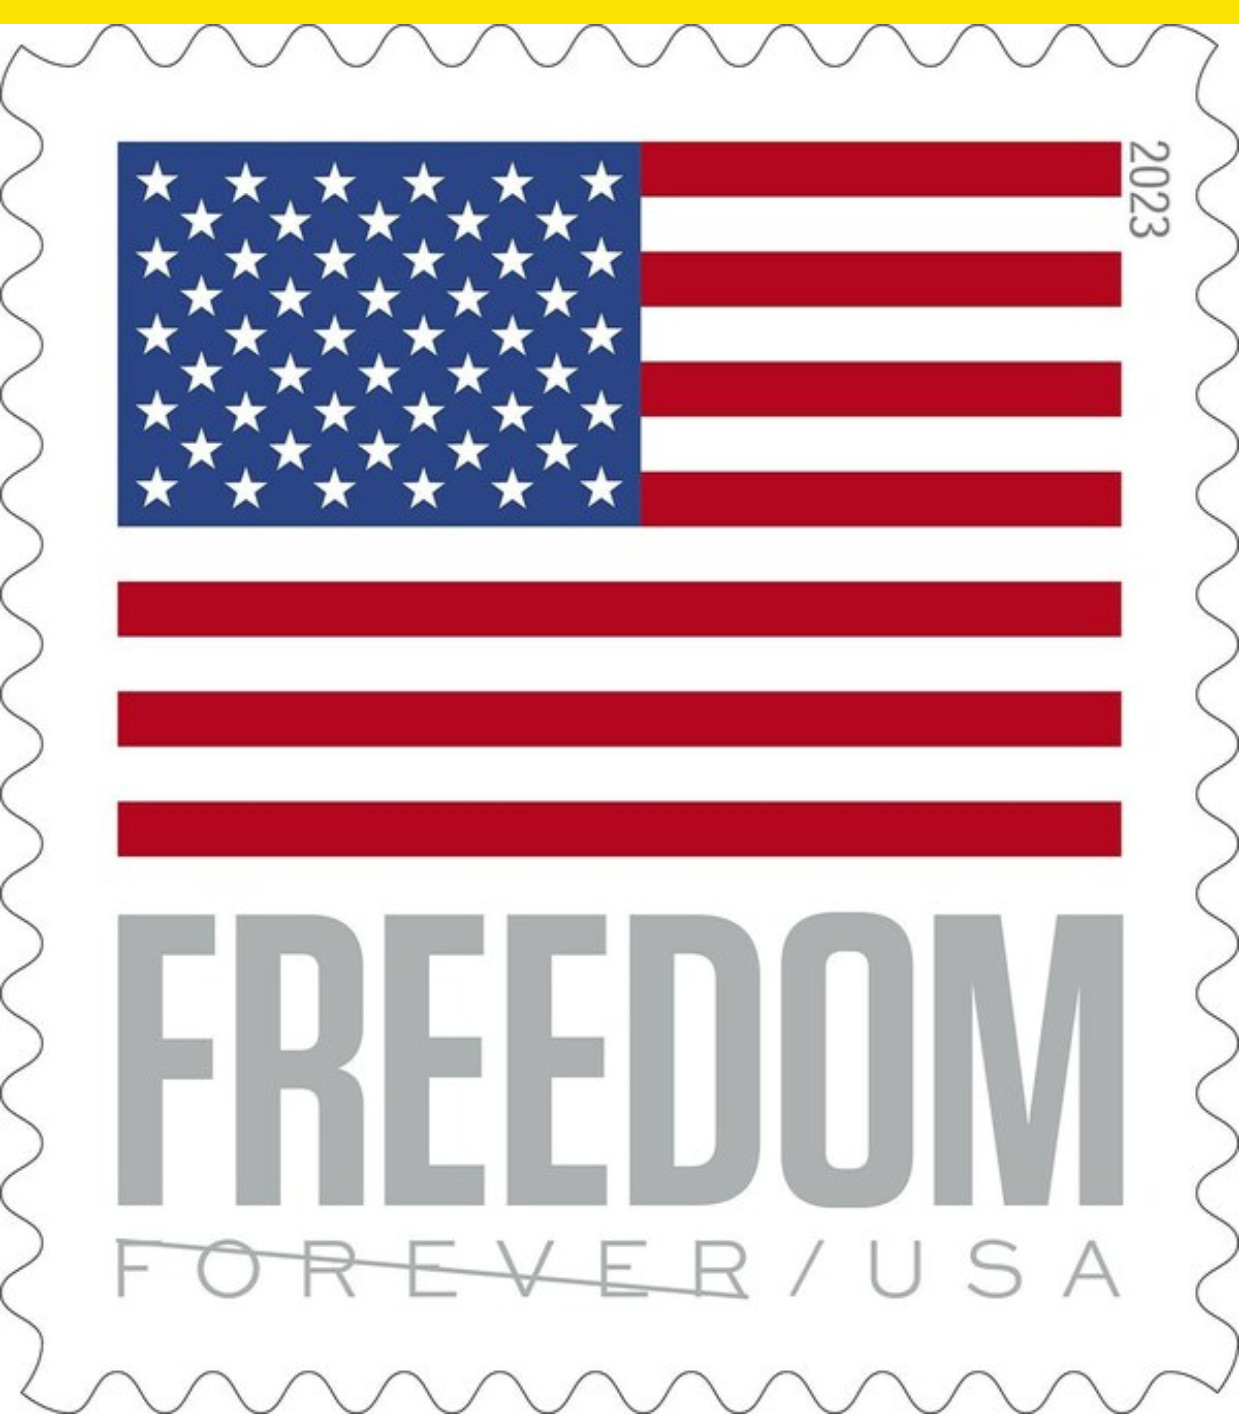 U.S. Postal Service announces stamps to be issued in 2023